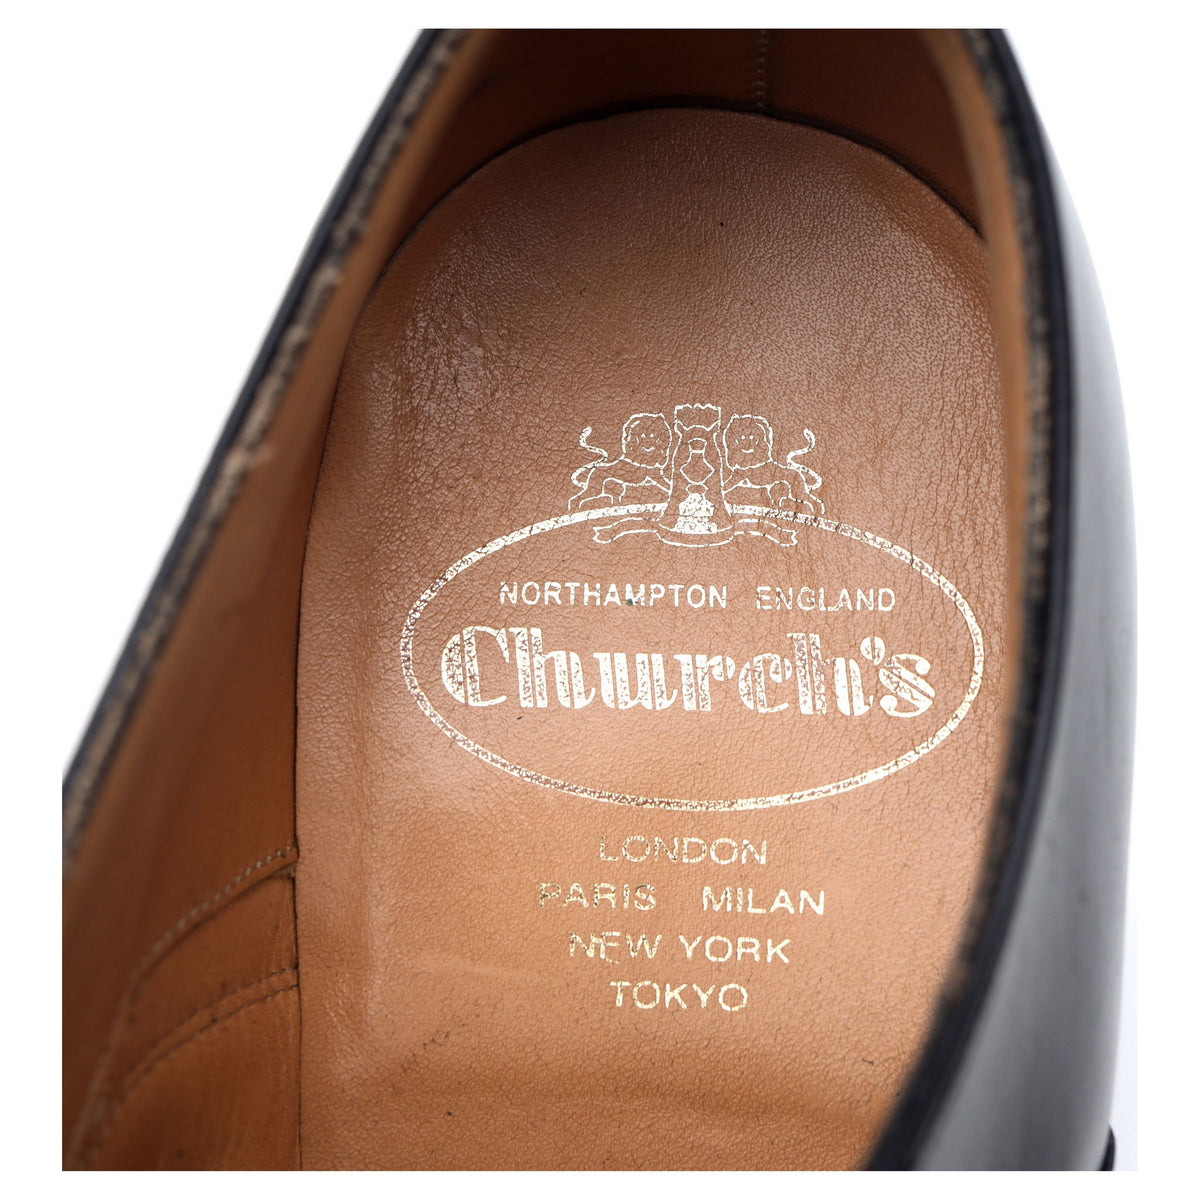 &#39;Coppice&#39; Black Leather Oxford UK 7.5 G